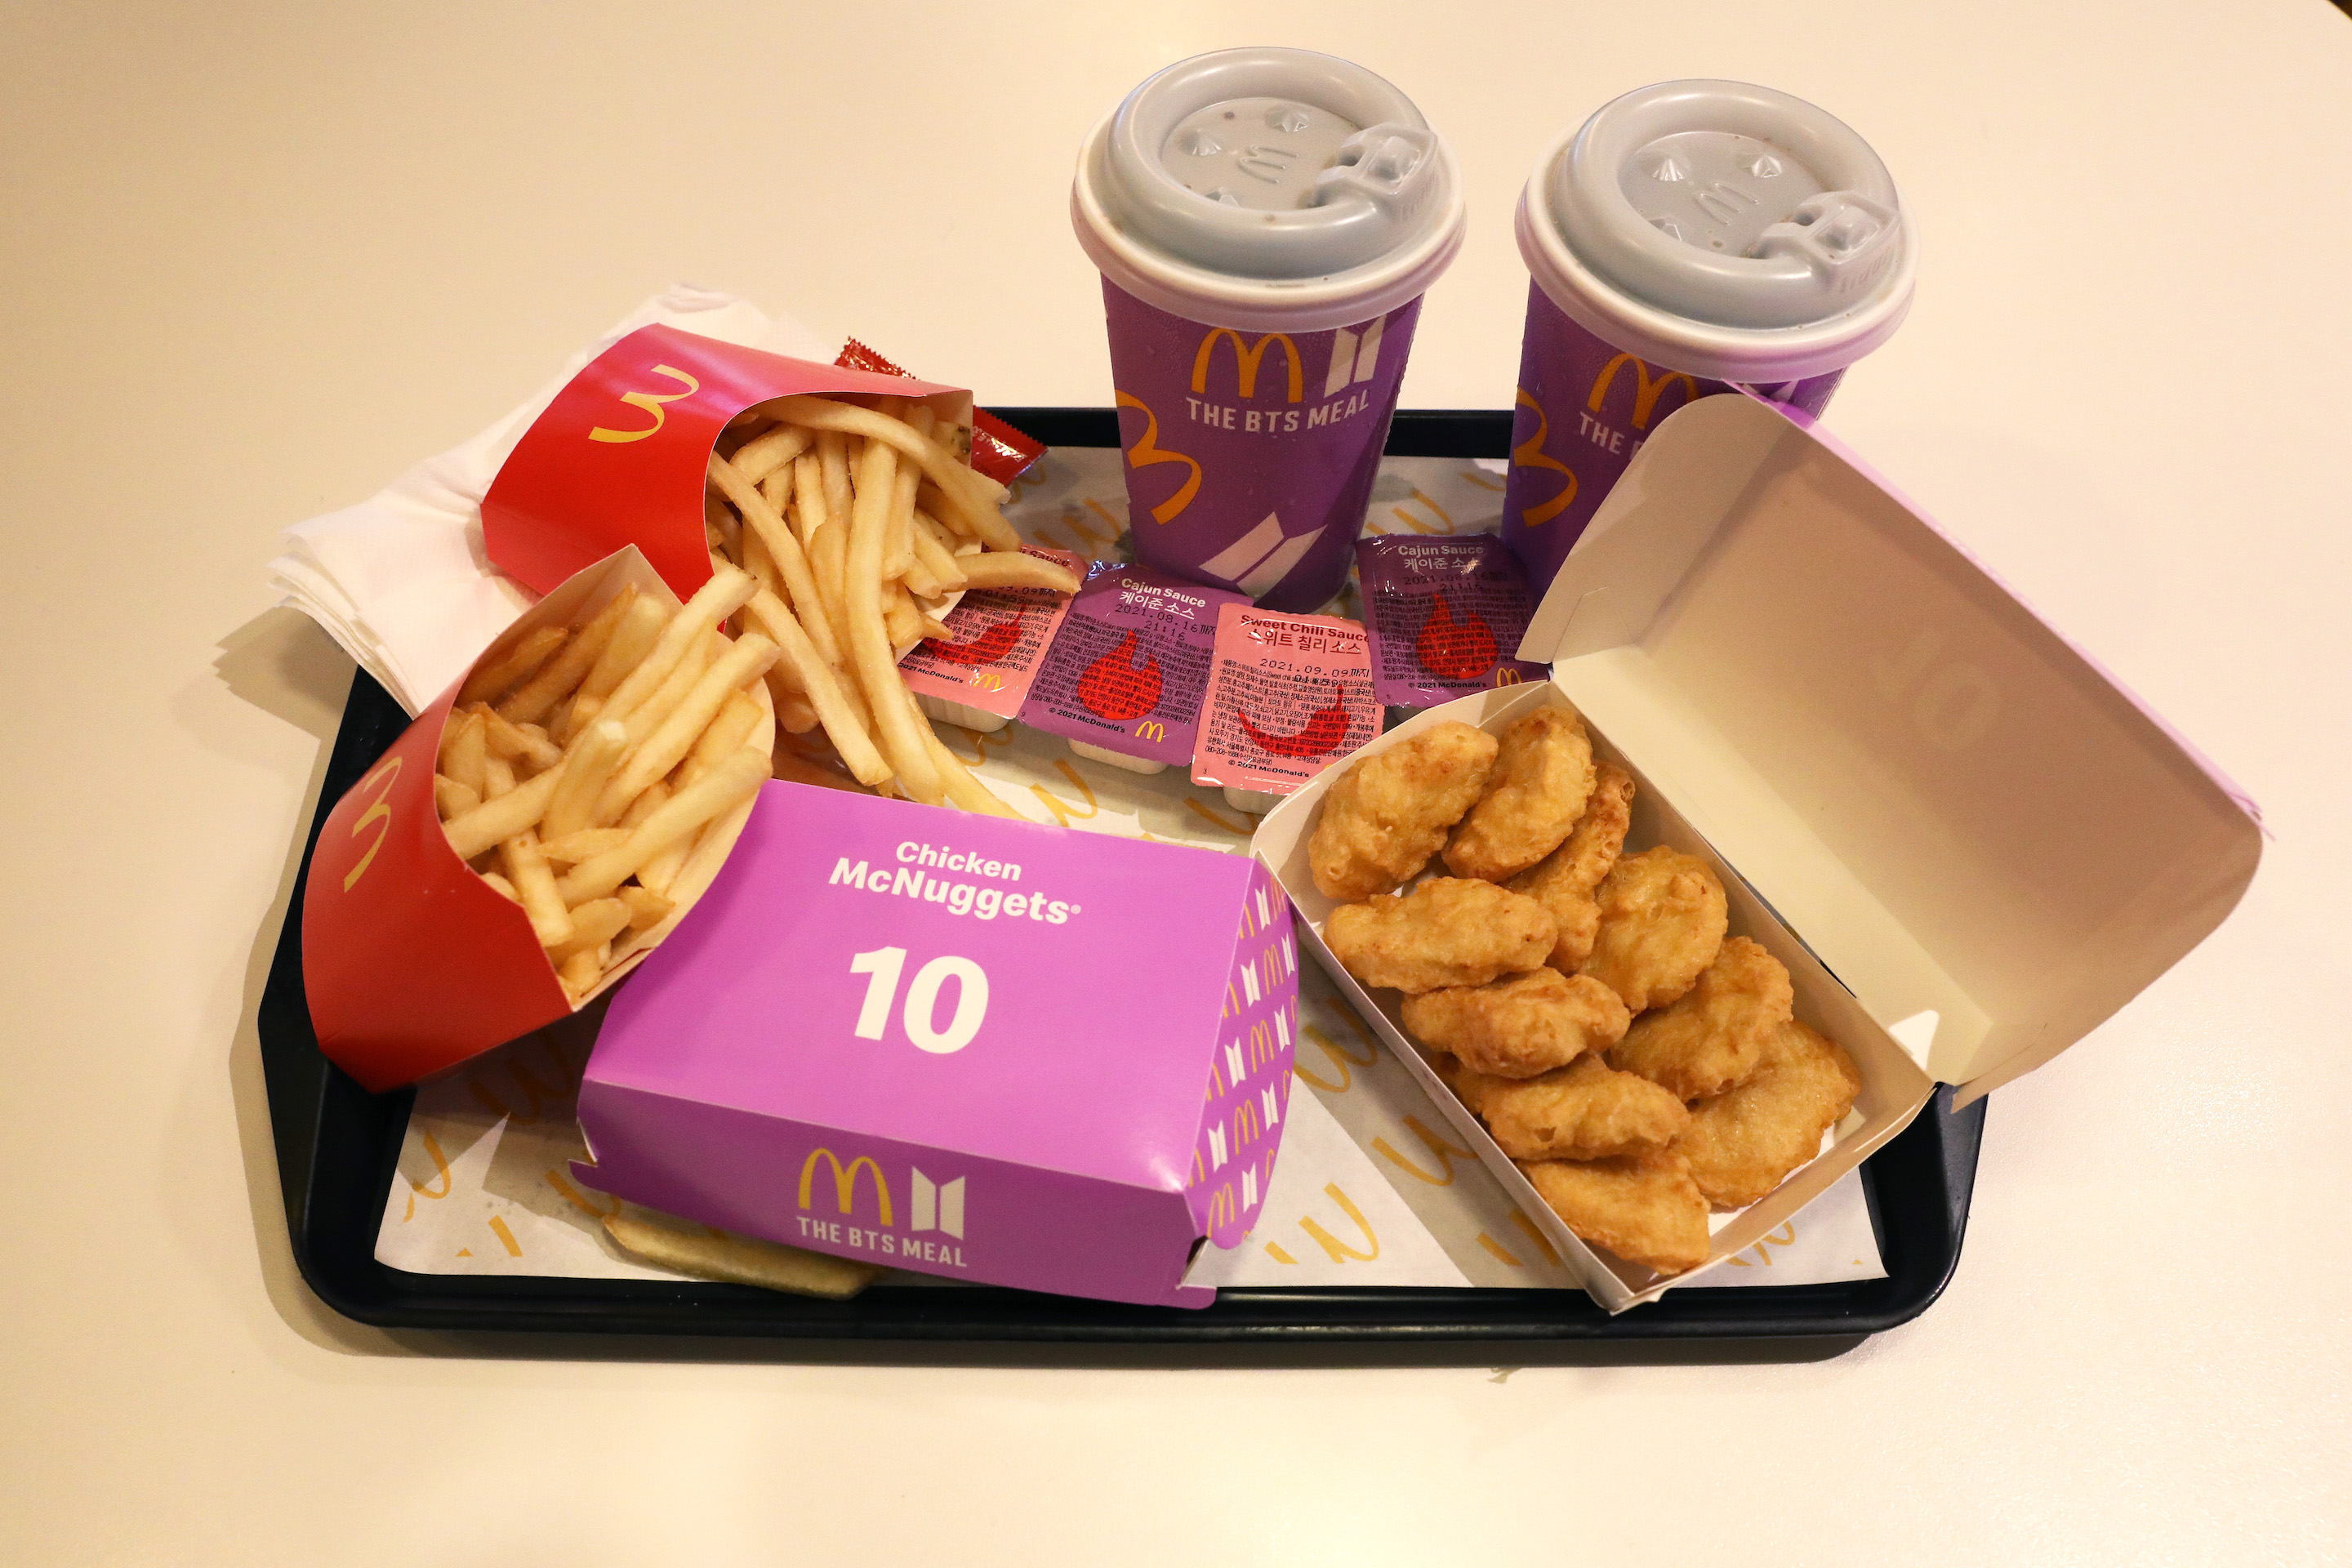 McDonald's BTS meal is seen in May 2021 in Seoul, South Korea